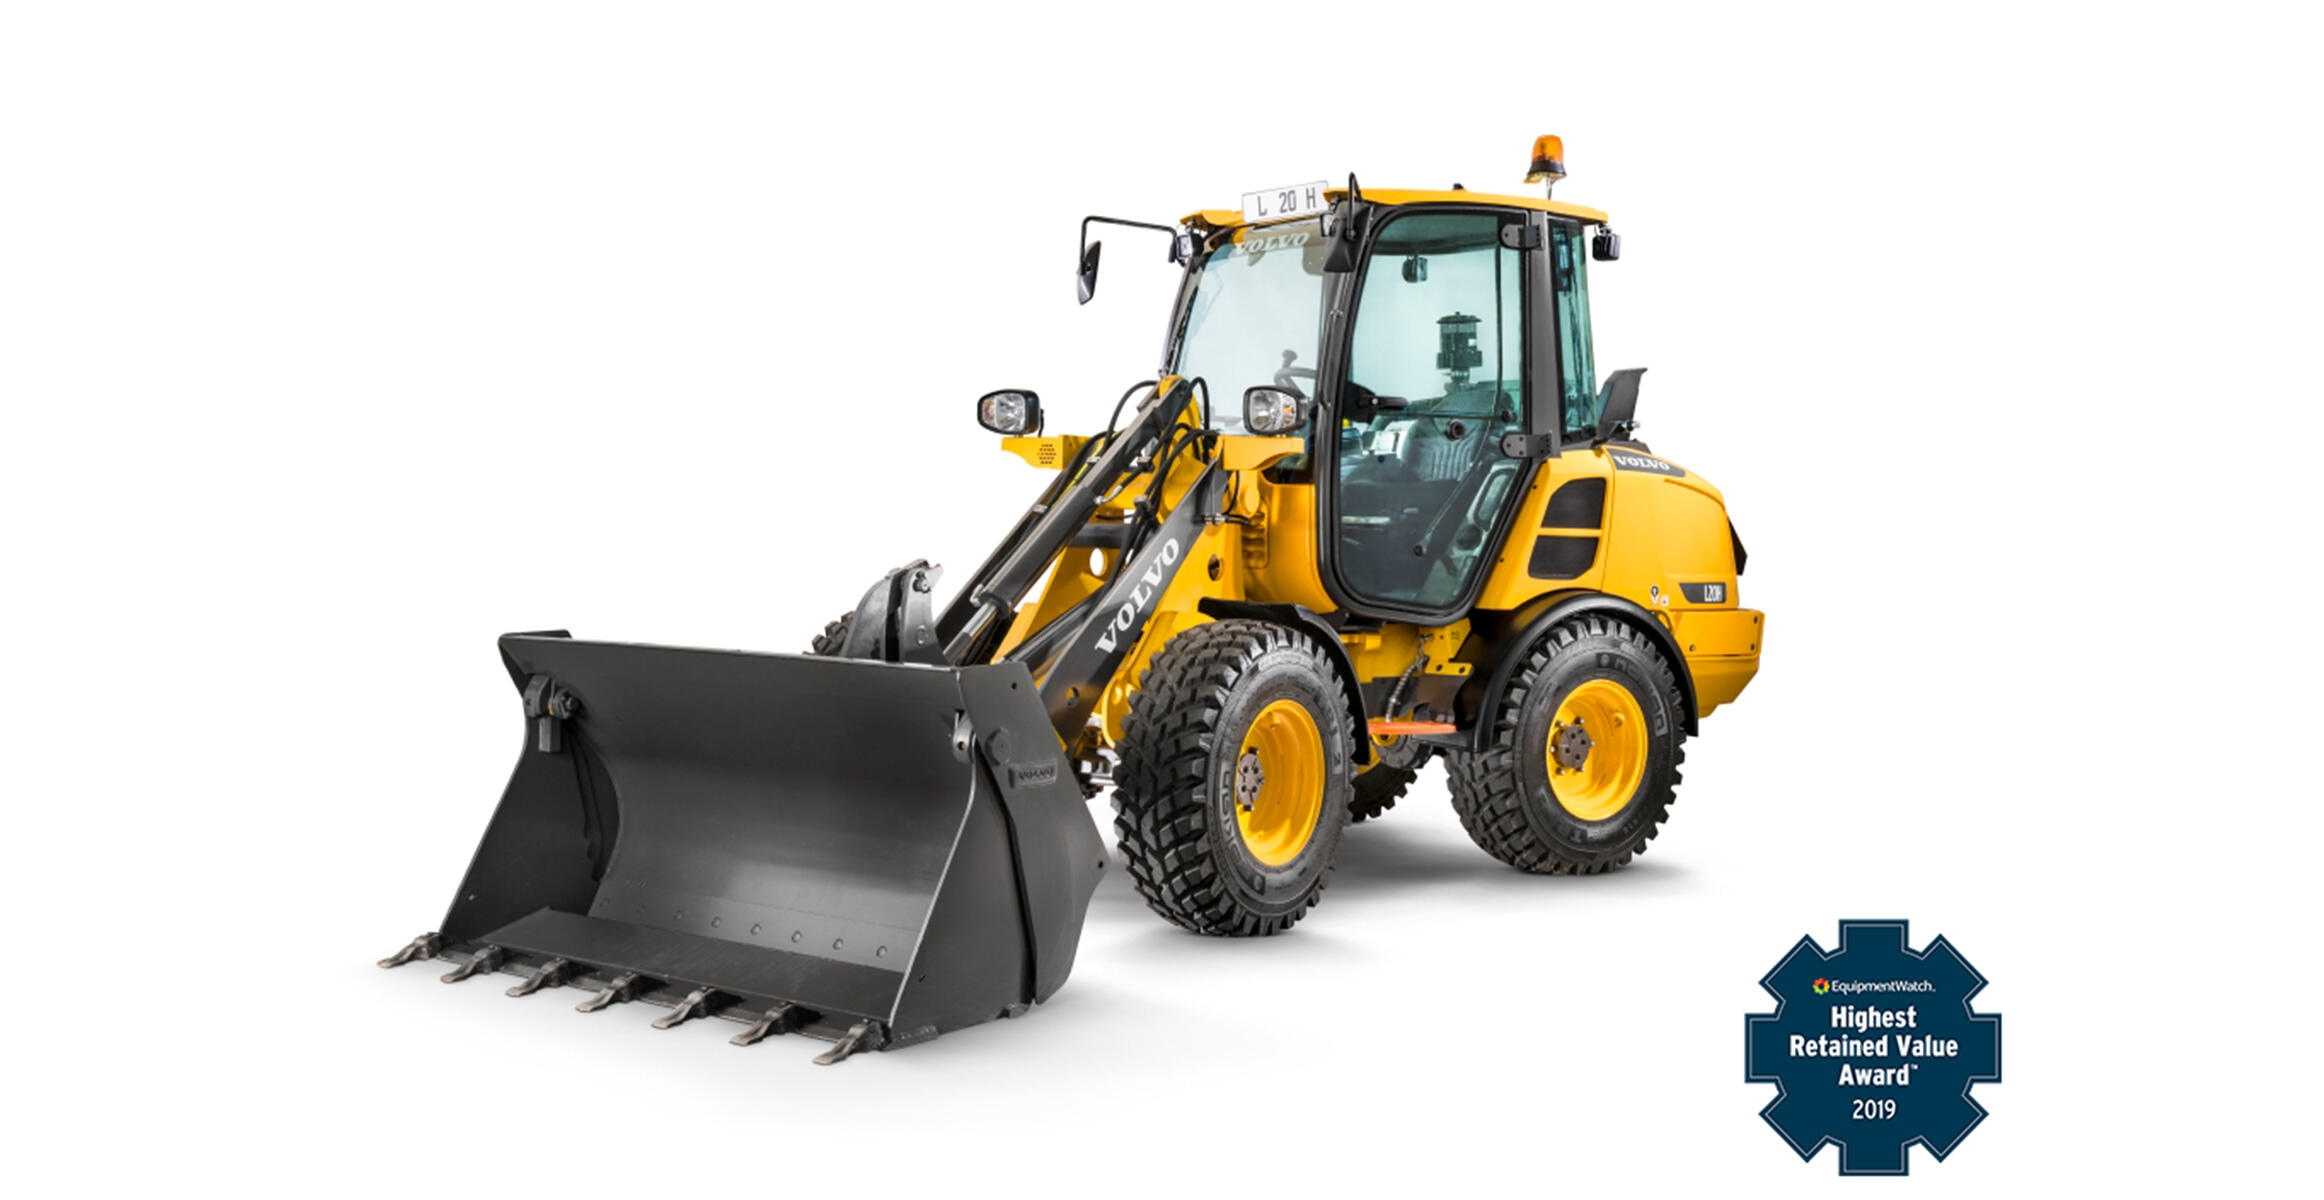 Volvo L20H Compact Wheel Loader wins EquipmentWatch 2019 Highest Retained Value Award